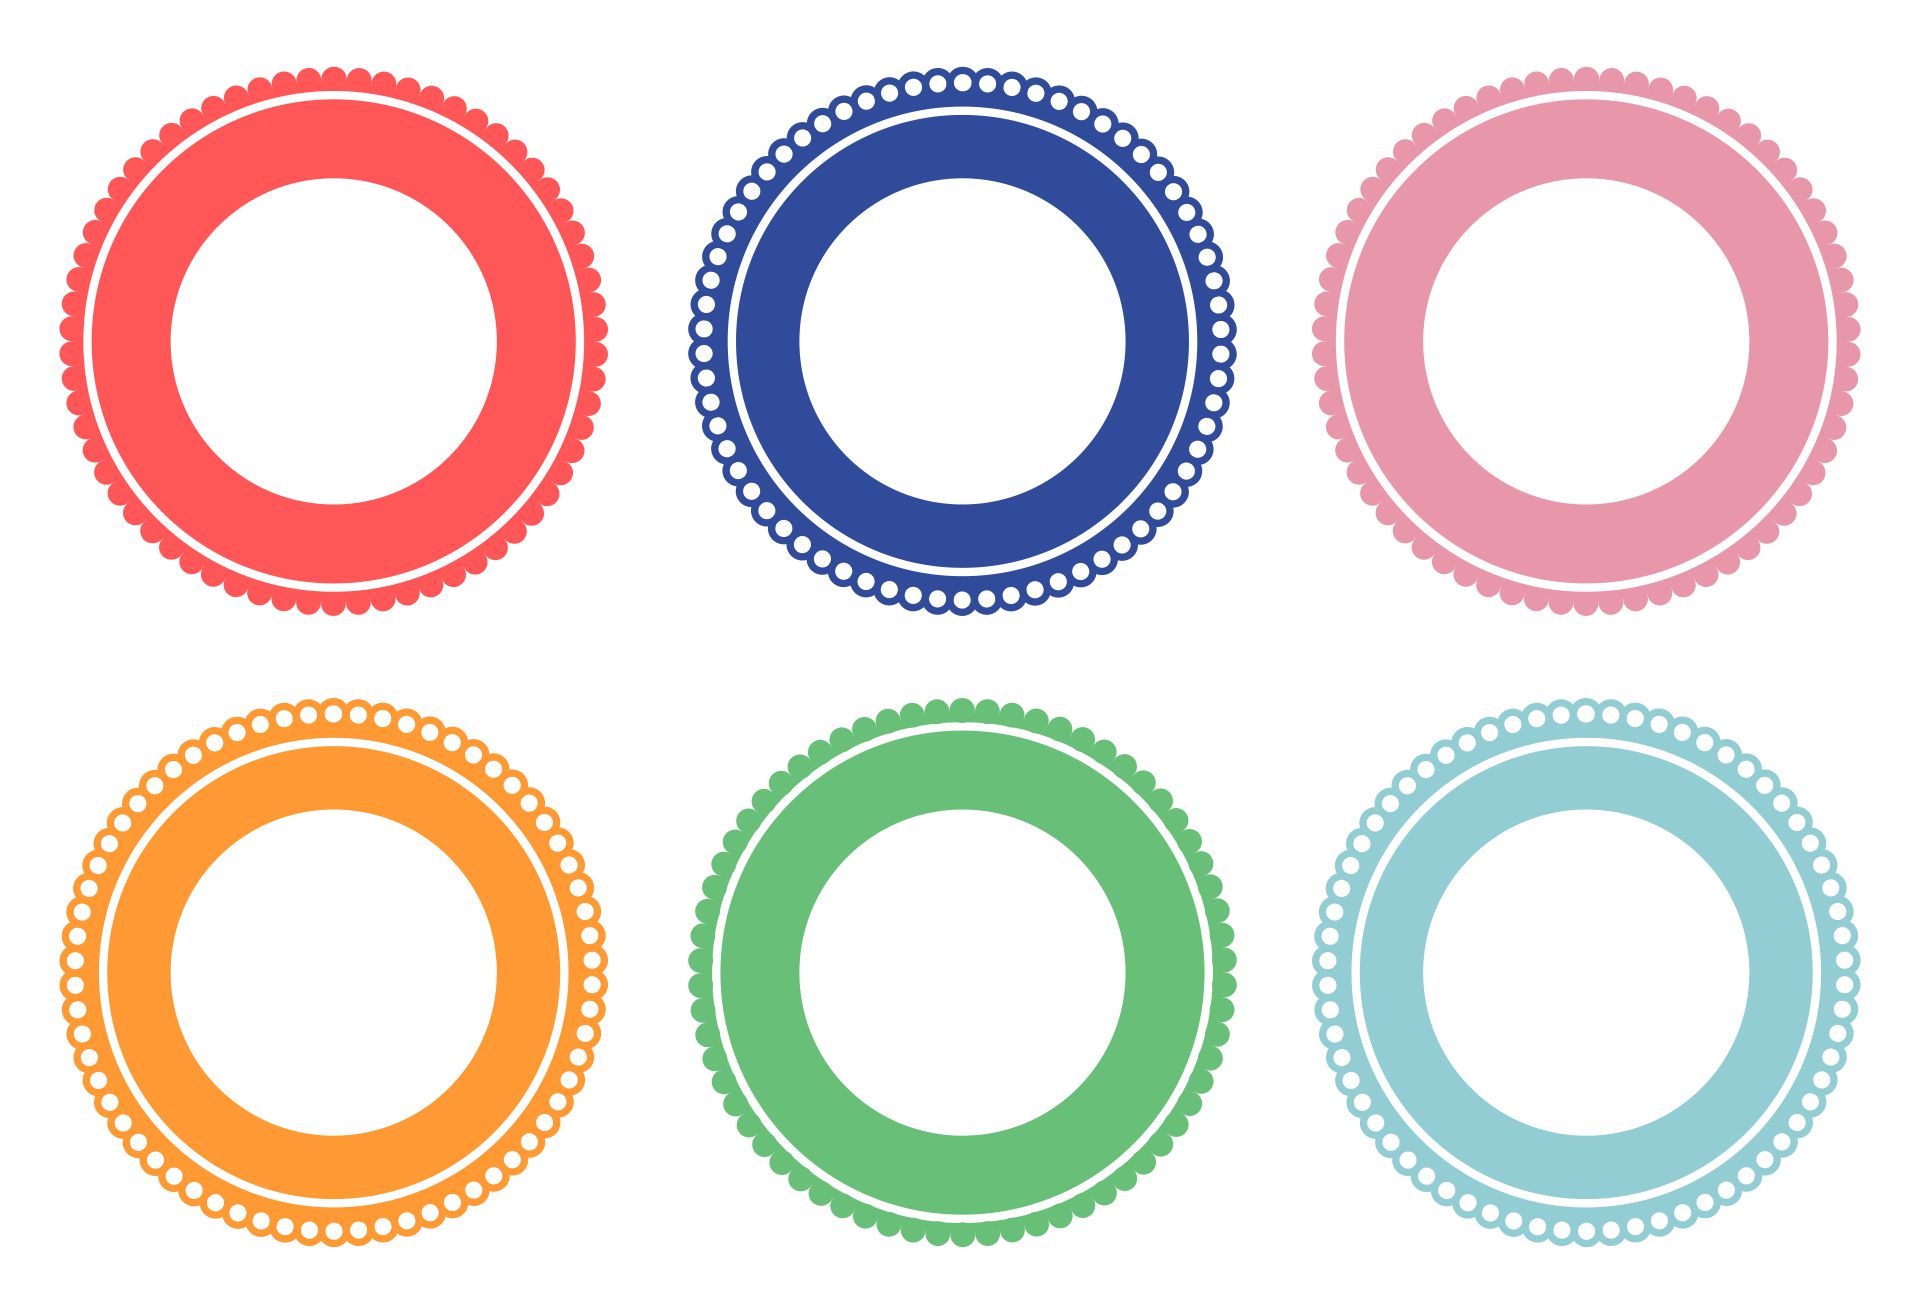 8-best-images-of-printable-round-labels-printable-round-label-8-best